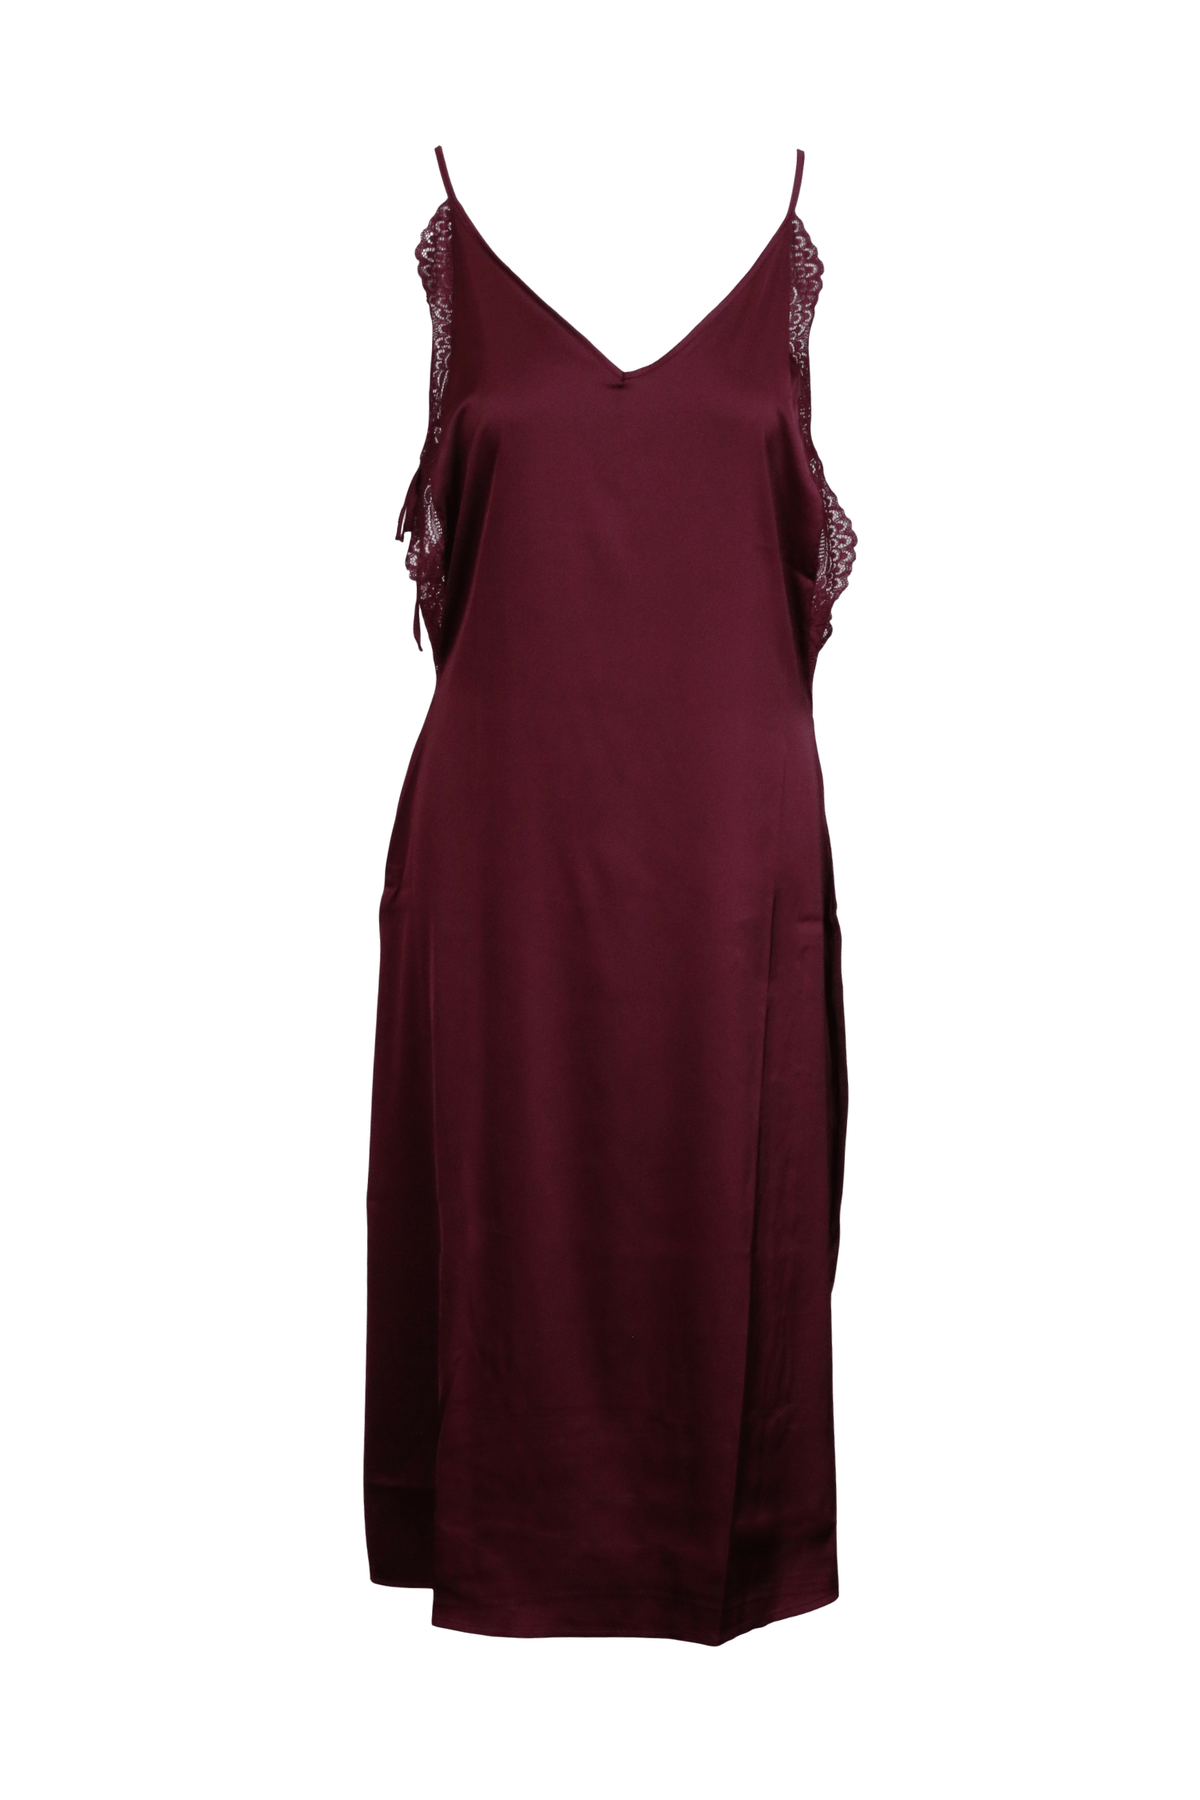 iCollection Loungewear Tania Gown - Burgundy